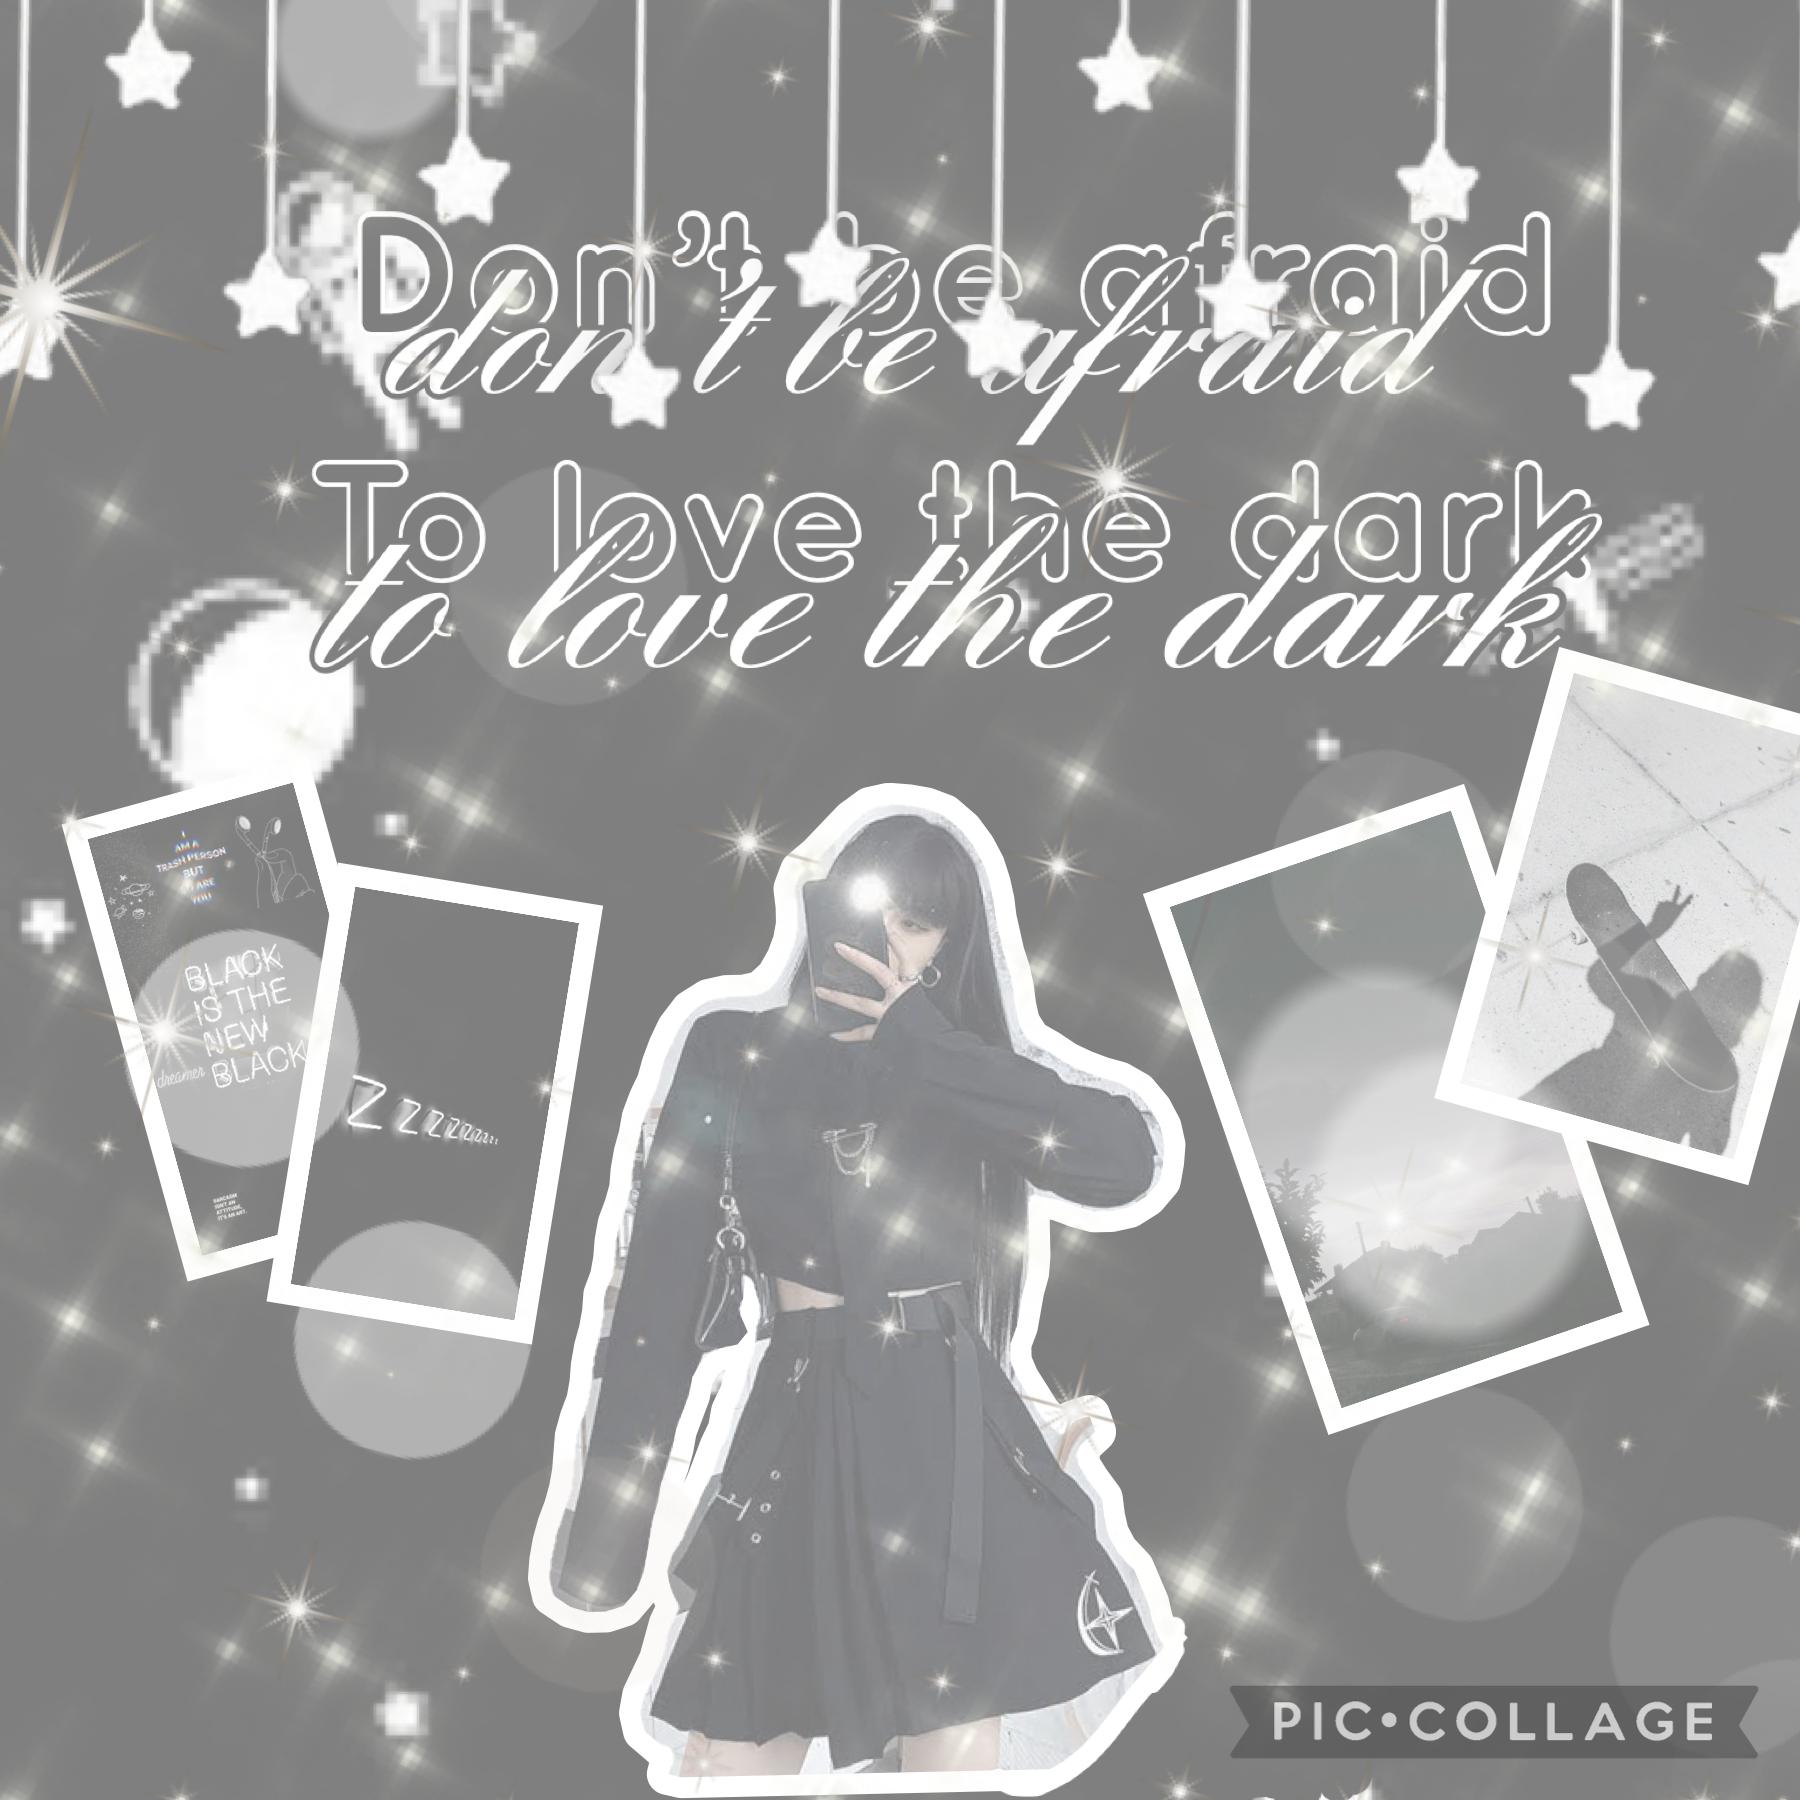 🖤 TAP 🖤
Don’t be afraid to love the dark! A suggestion for a black collage.